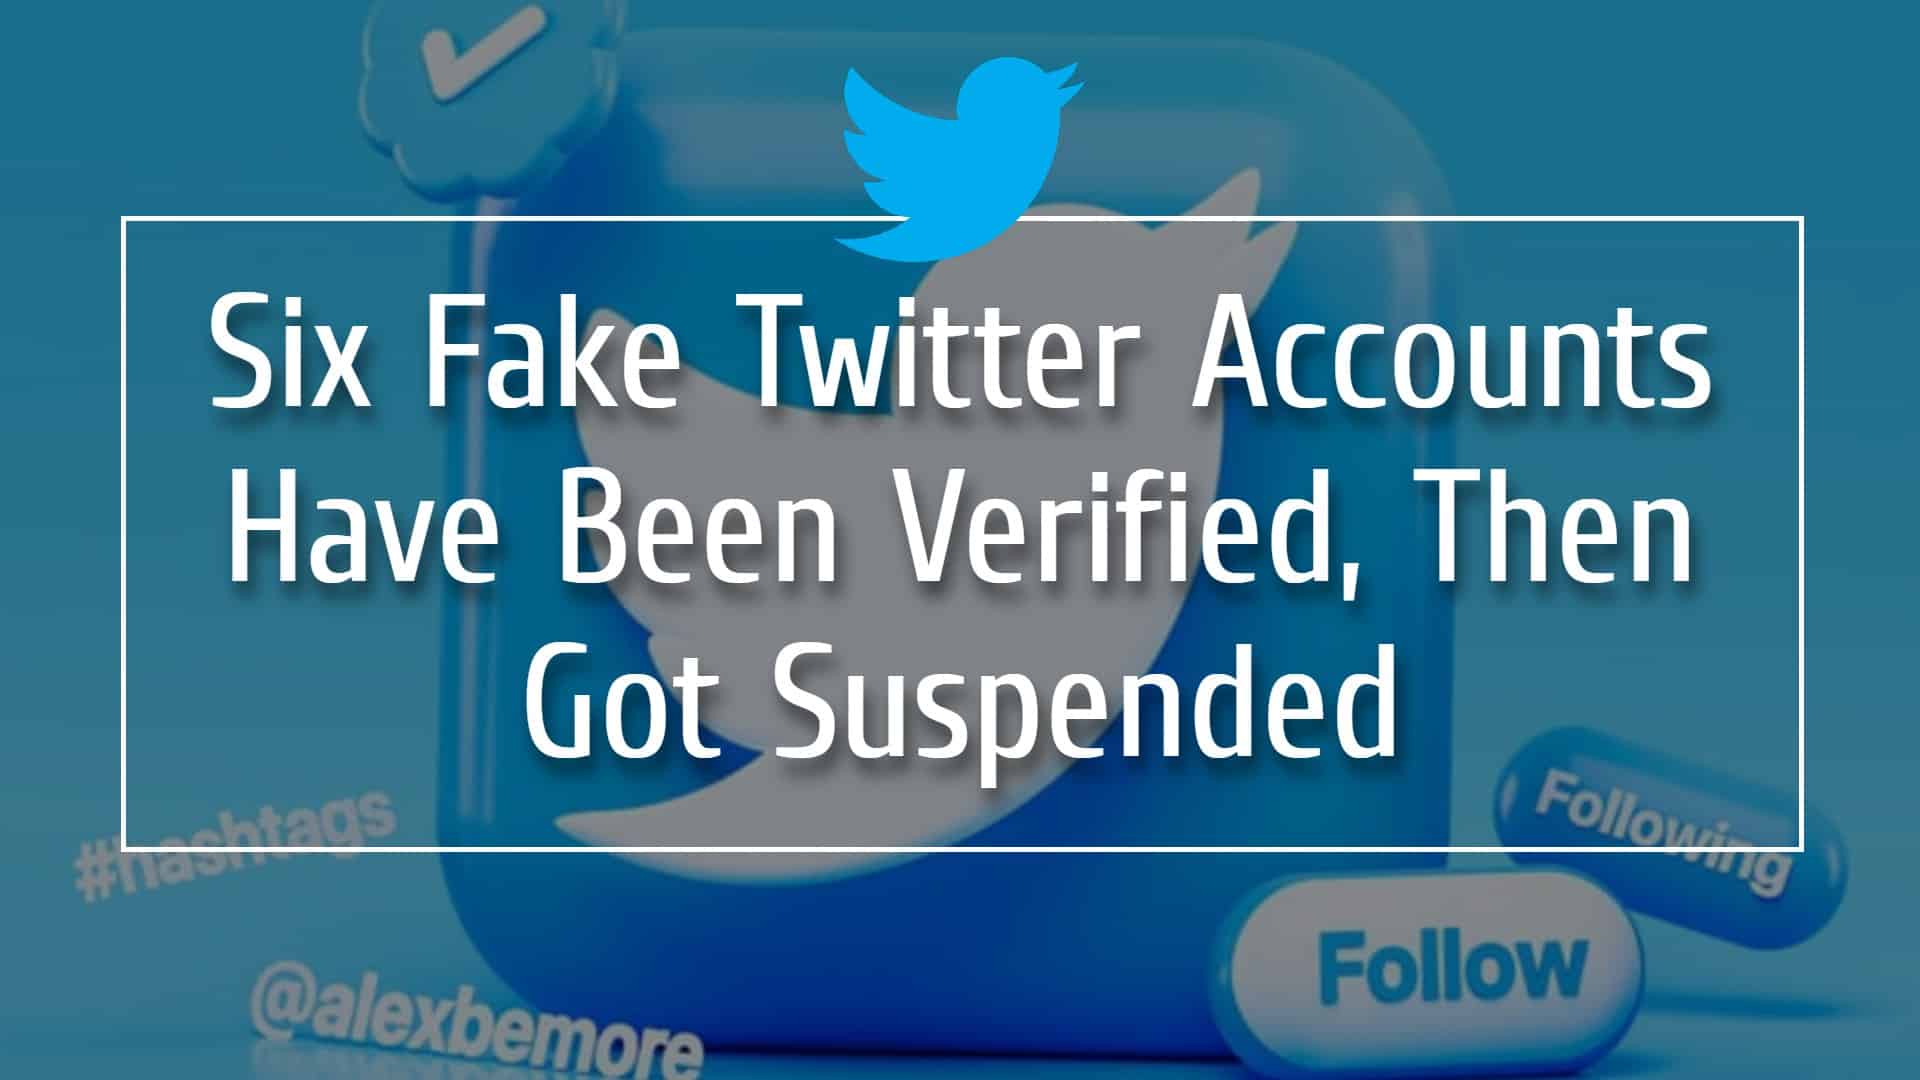 Six Fake Twitter Accounts Have Been Verified, Then Got Suspended